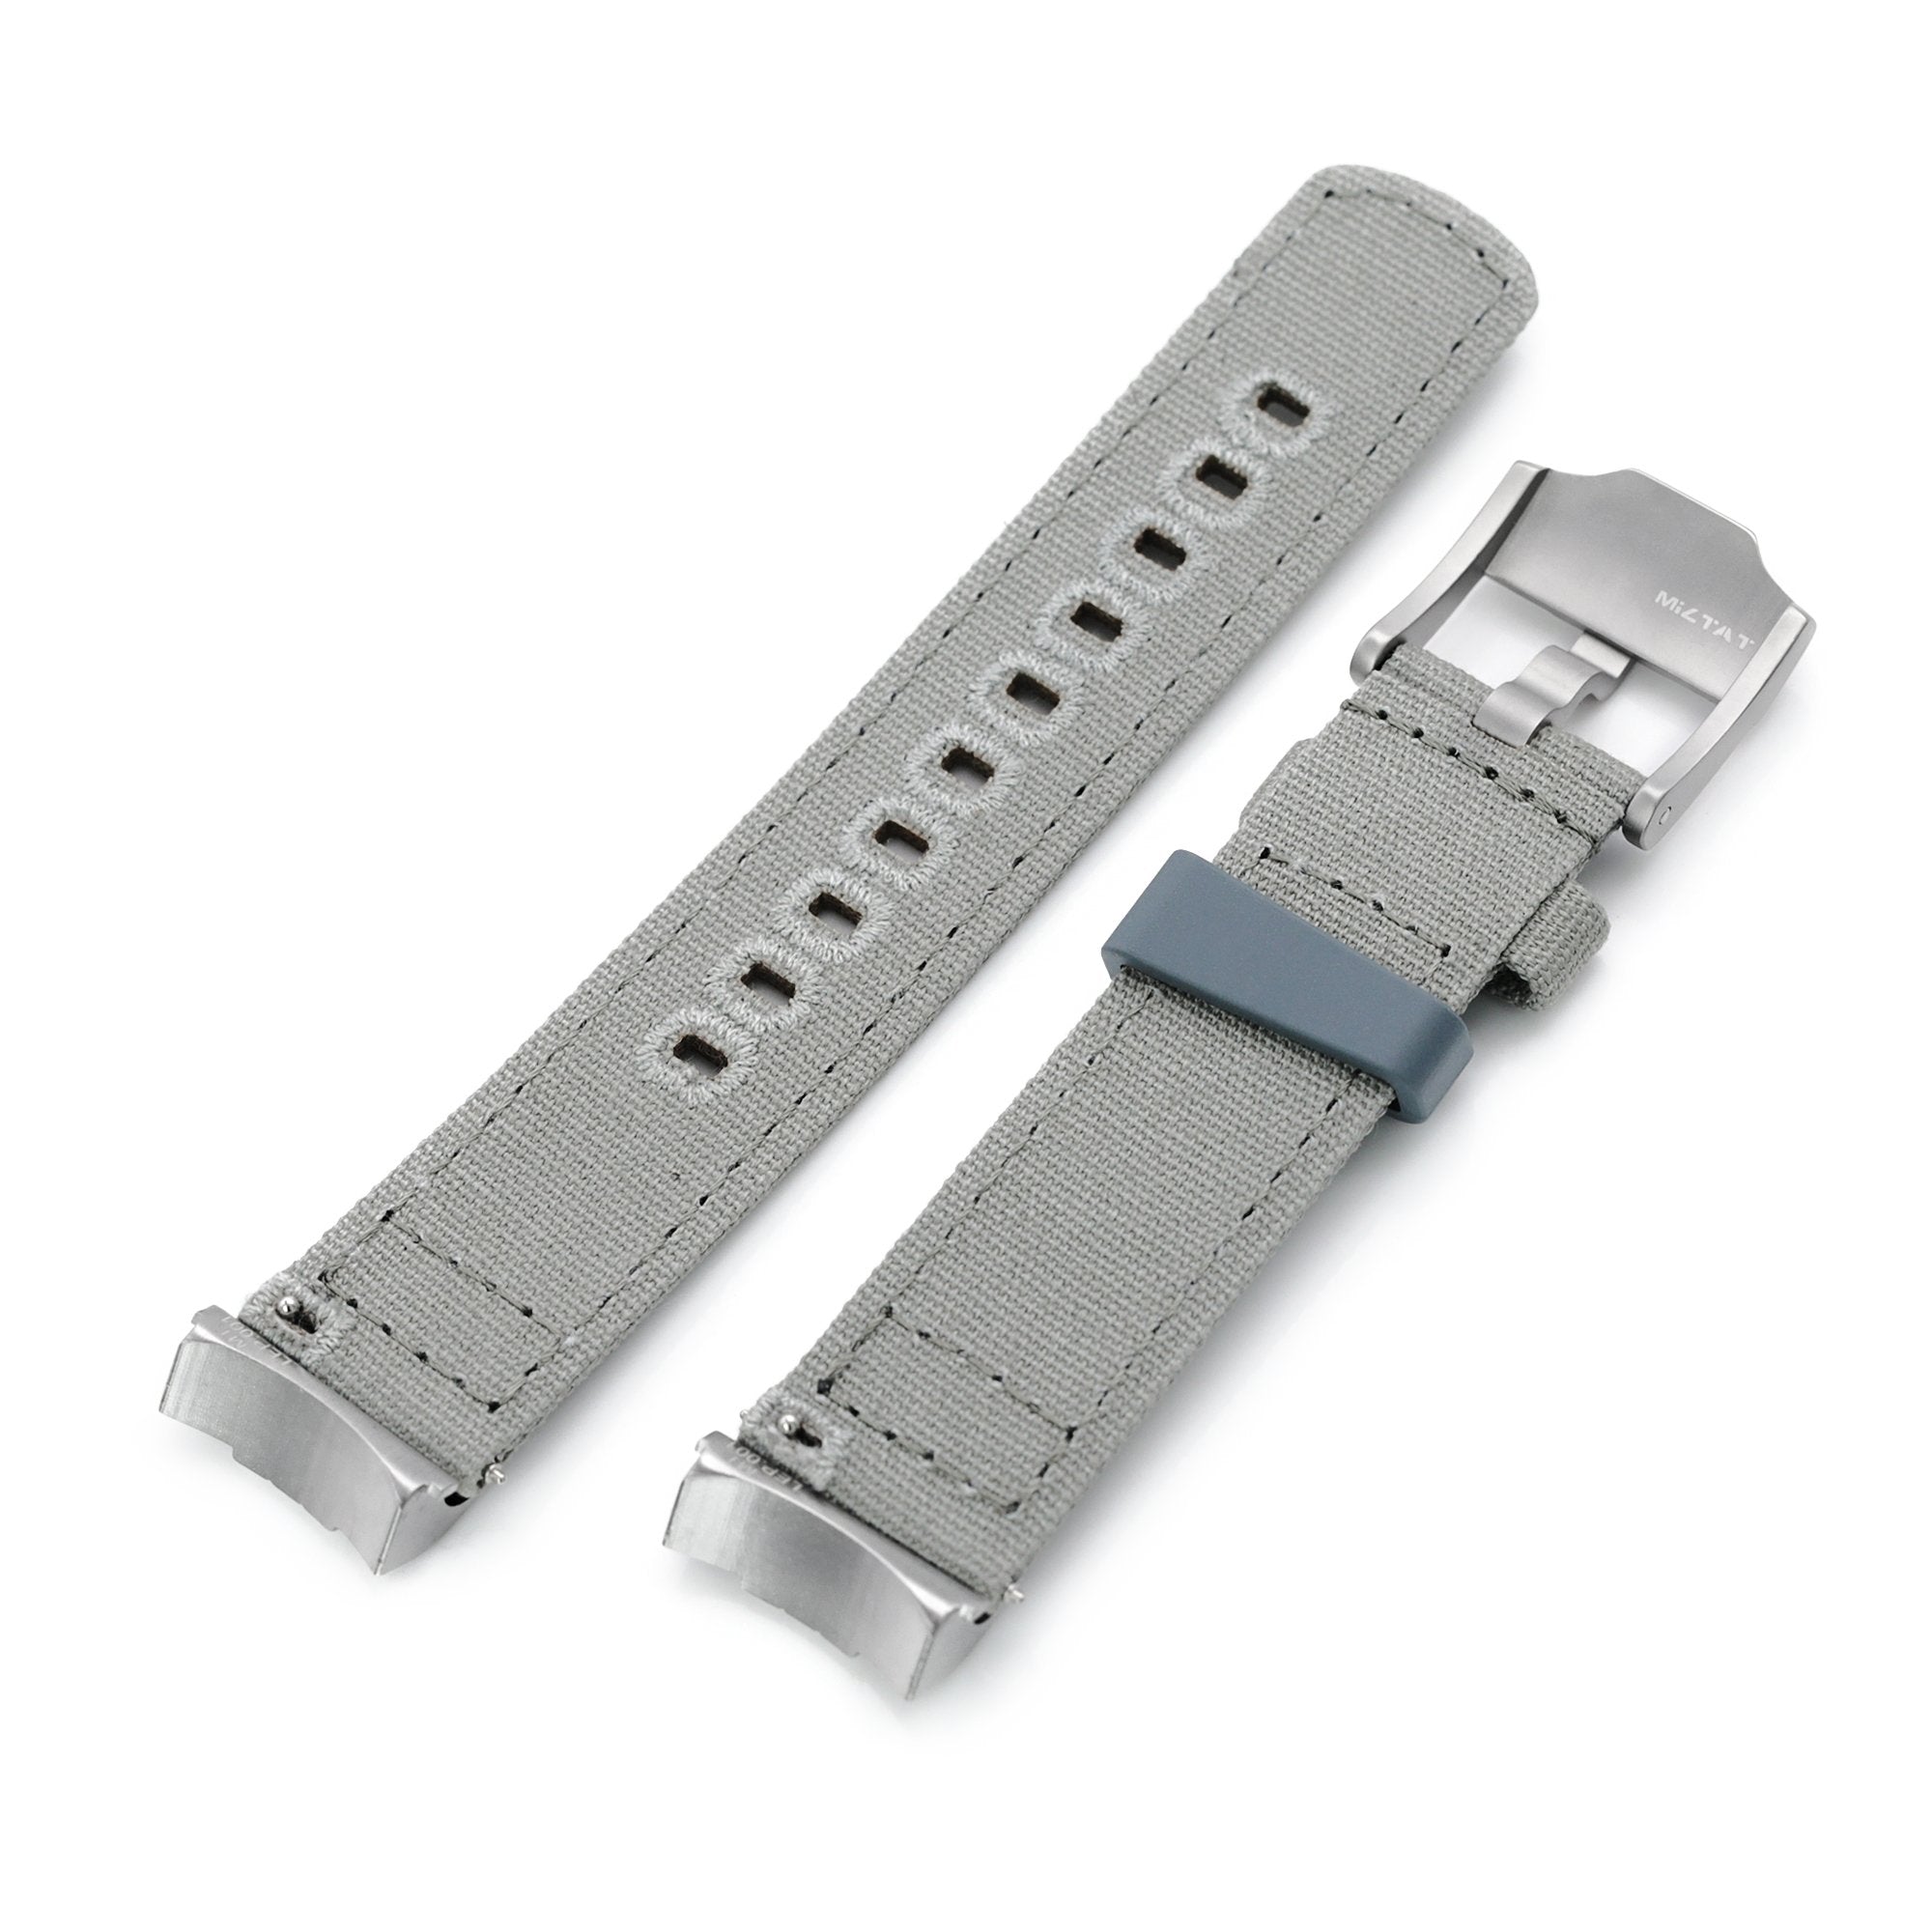 Khaki Green Quick Release Add-on End Piece Canvas + Watch Strap for Seiko Sumo SPB103 Strapcode Watch Bands